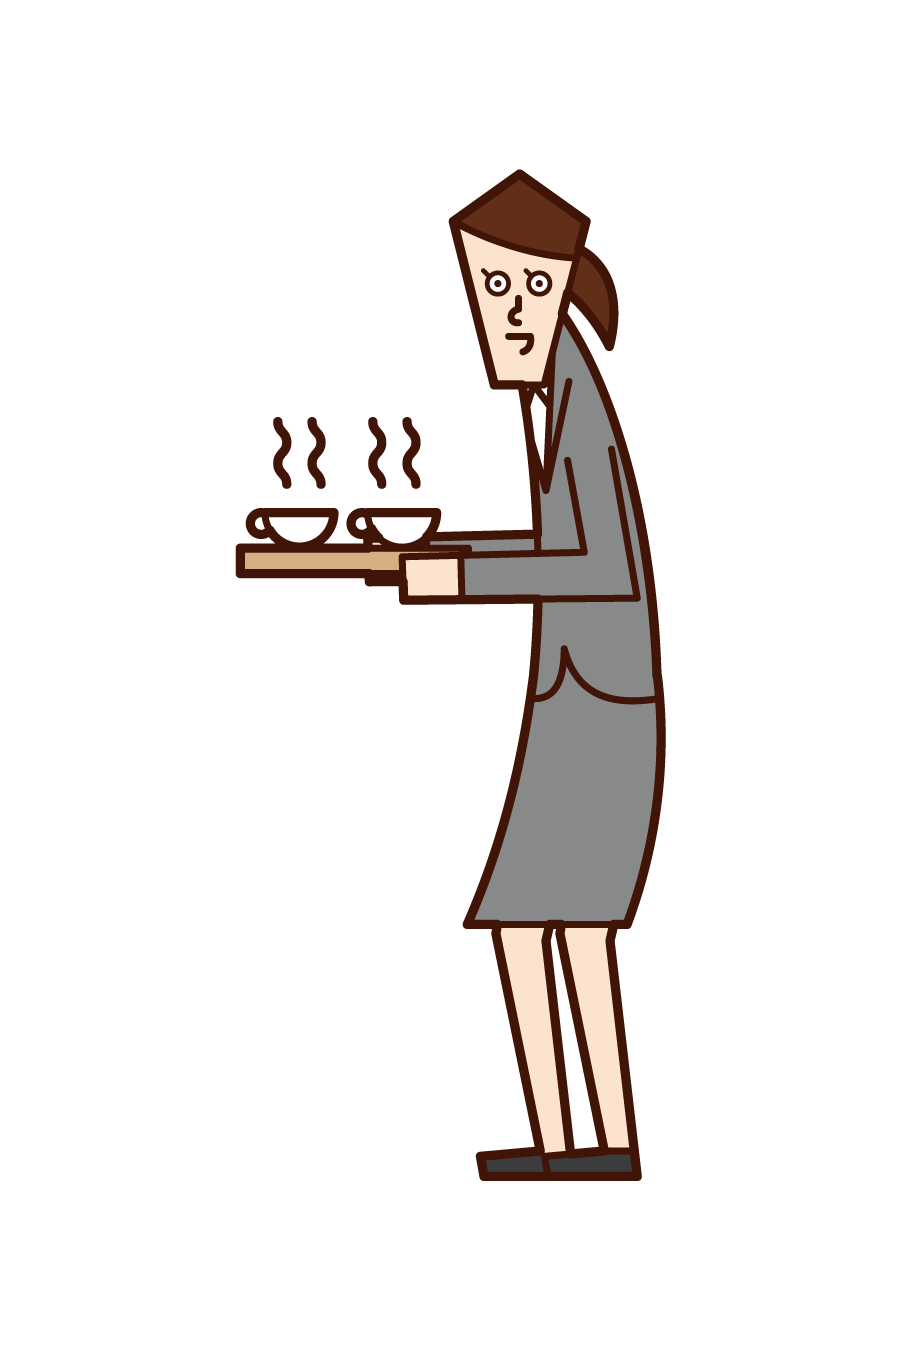 Illustration of a person (woman) who serves tea or coffee